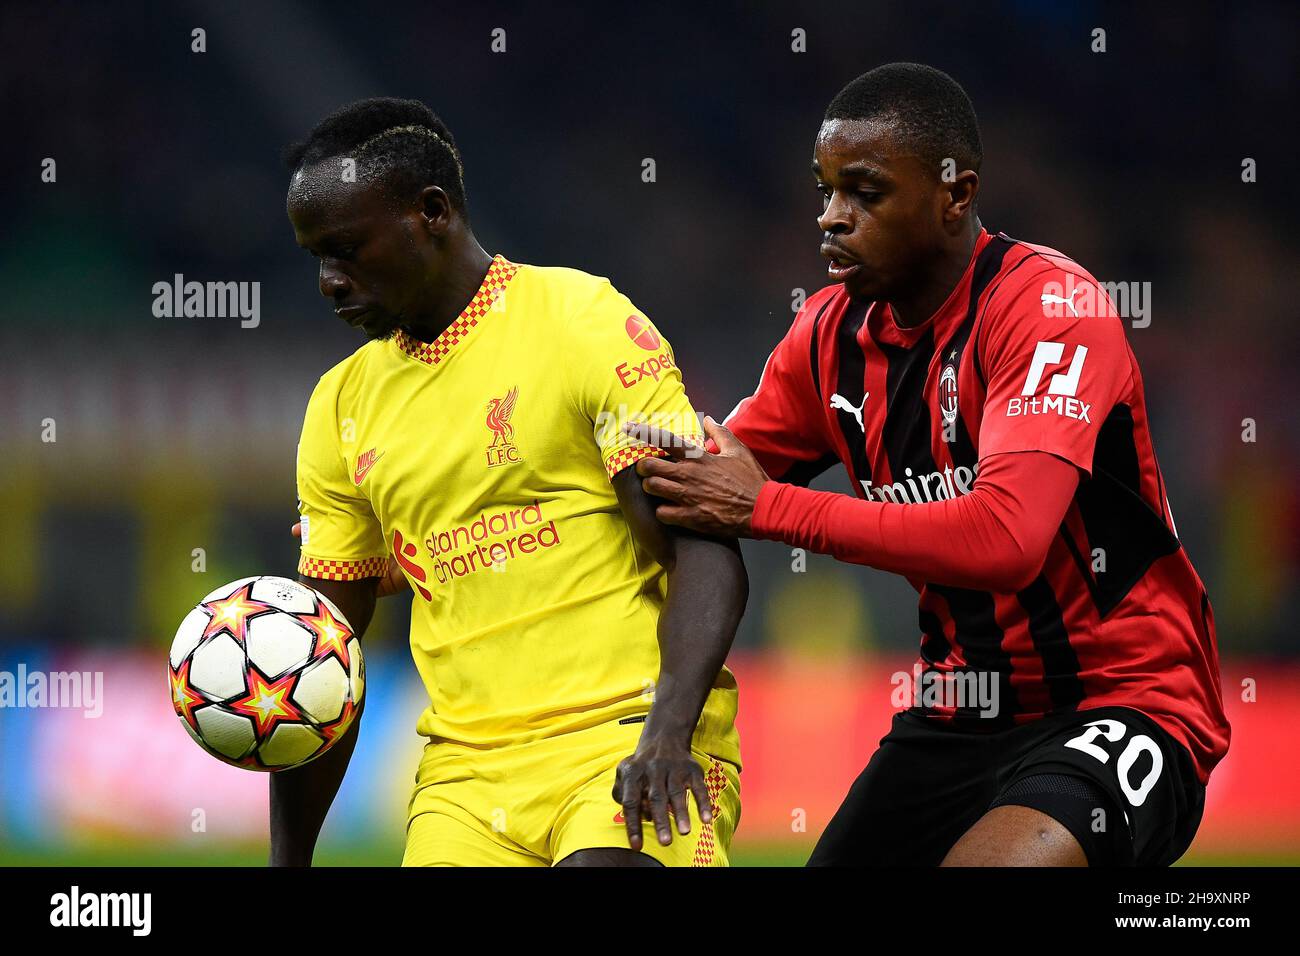 Milan, Italy. 07 December 2021. Sadio Mane of Liverpool FC is challenged by Pierre Kalulu of AC Milan during the UEFA Champions League football match between AC Milan and Liverpool FC. Credit: Nicolò Campo/Alamy Live News Stock Photo